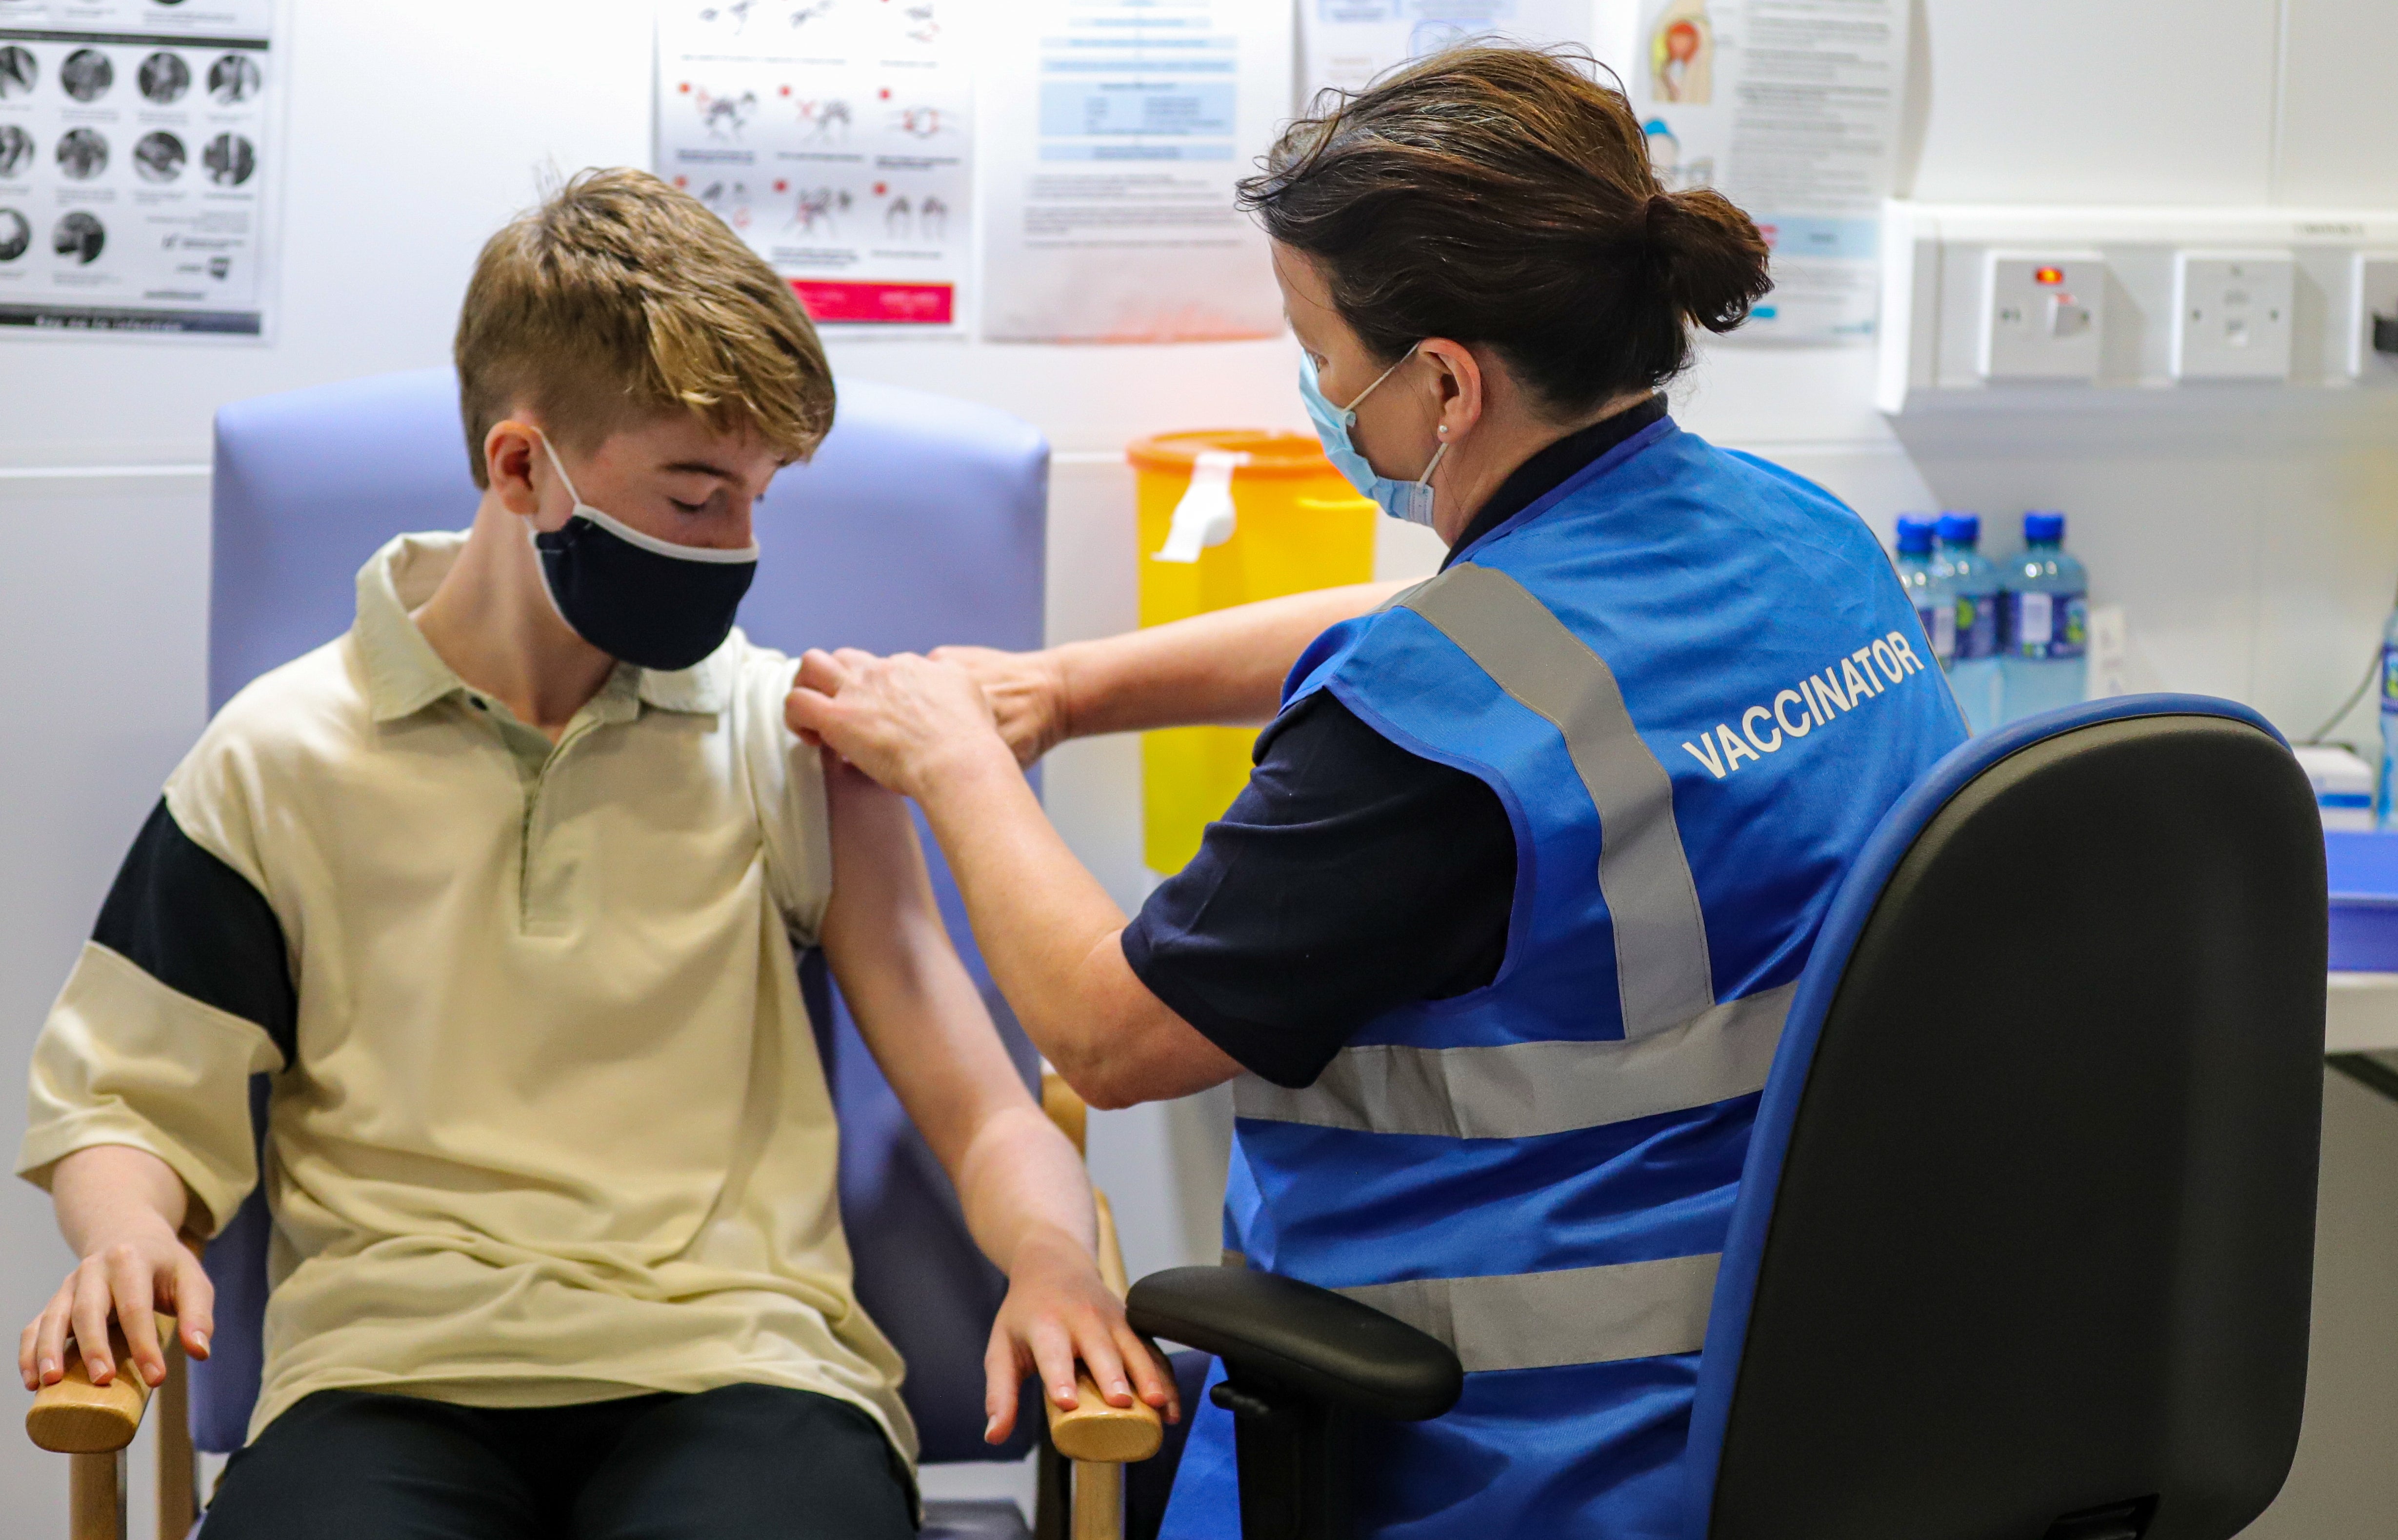 Kevin Mckeon, 14, receives his first dose of the Covid-19 vaccine from vaccinator Geraldine Flynn at the Citywest vaccination centre in Dublin (Damien Storan/PA)